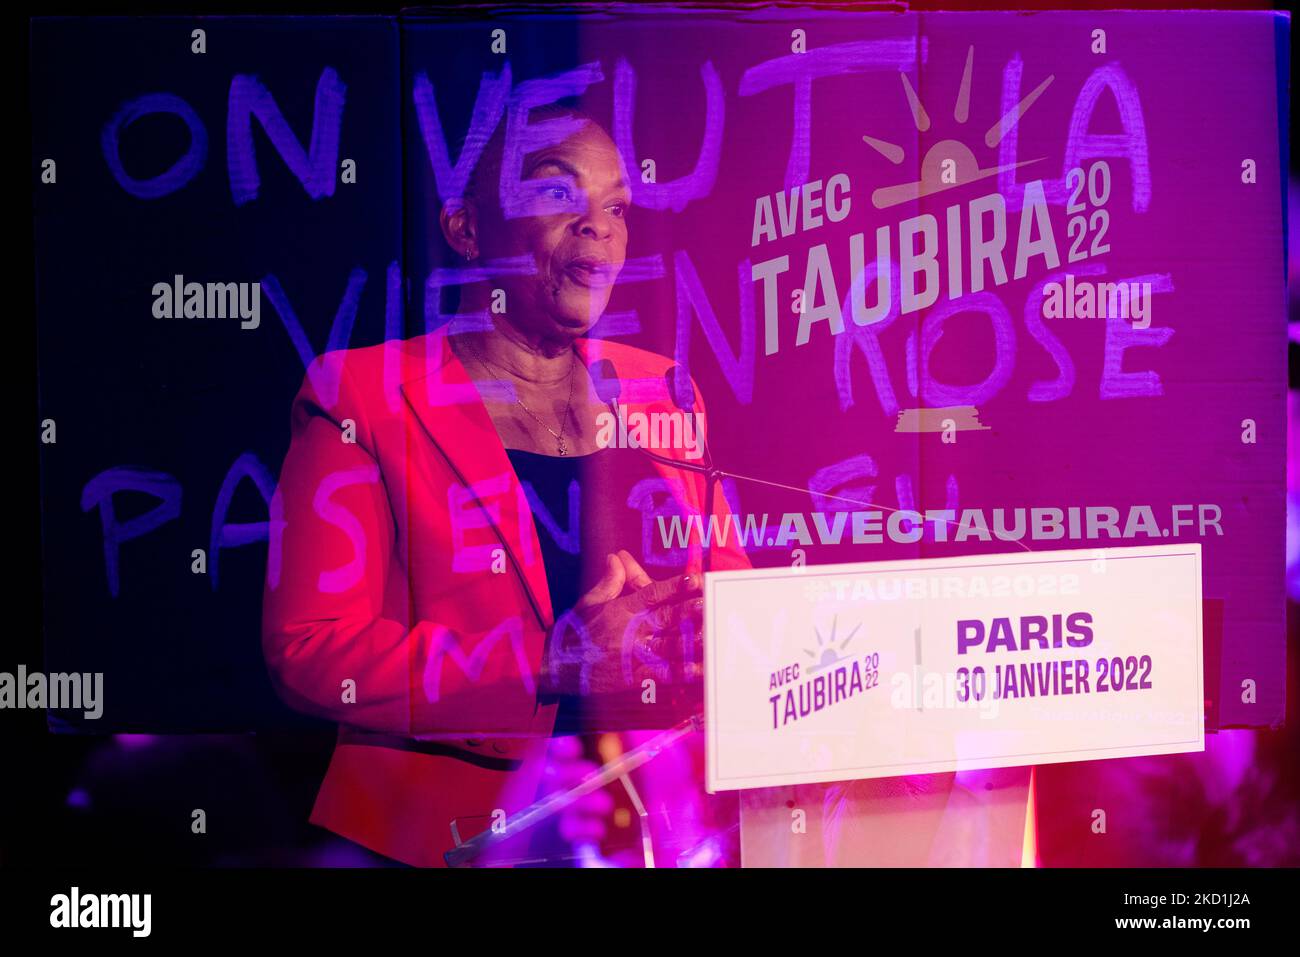 French left-wing candidate in the 'popular primary' (primaire populaire) Christiane Taubira delivers a speech to her supporters gathered at the Point Ephemere in Paris on January 30, 2022 after the announcement of the results of the 'popular primary' that saw her finish first and thus be a candidate in the presidential election. (Photo by Samuel Boivin/NurPhoto) Stock Photo